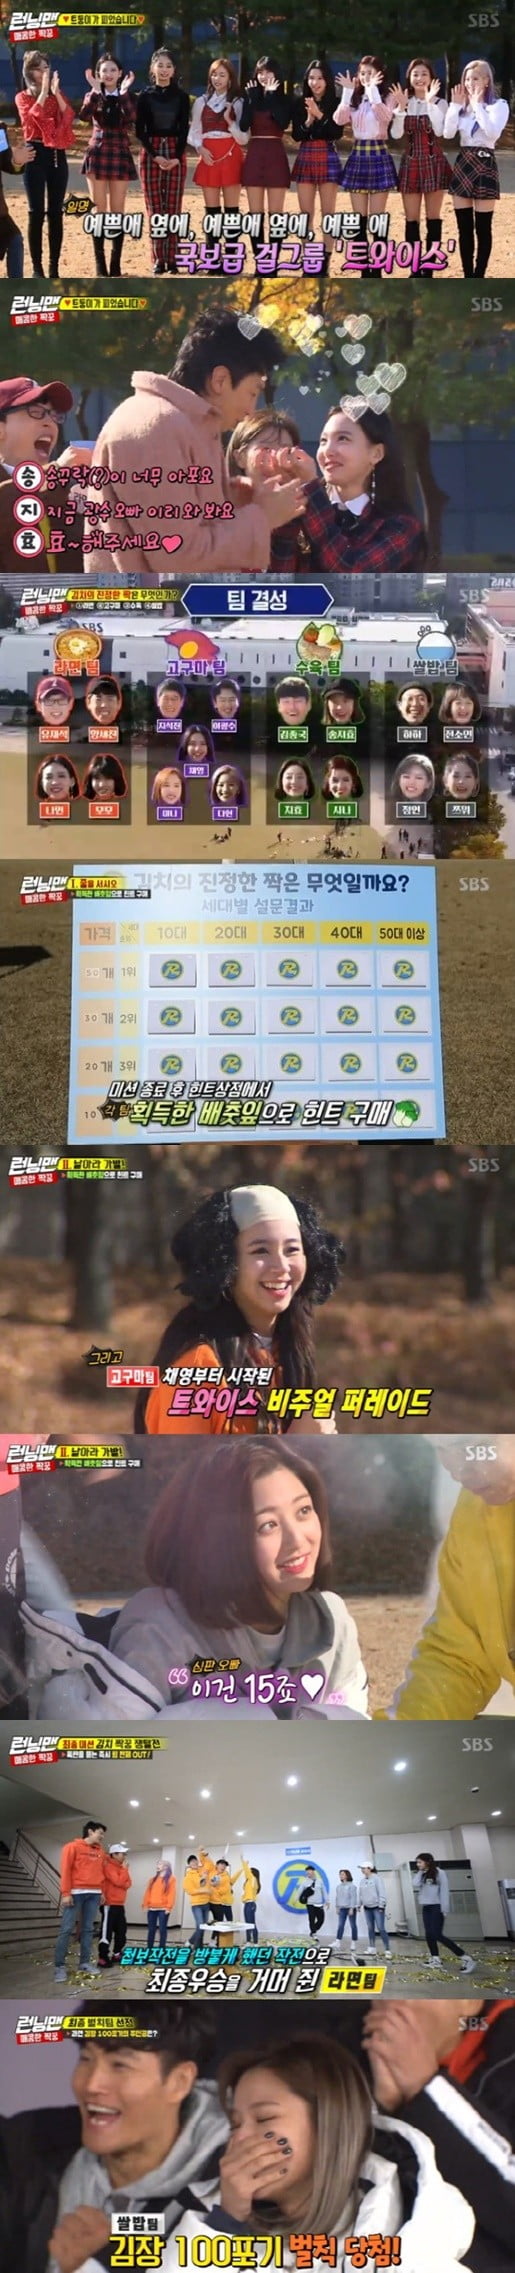 <p>The last 2 days broadcast SBS Running Manin the TWICE of the square of the unexpected shit sonborn of the viewers of Big Fun was responsible for.</p><p>The kimchis true mate, find Kim most distinctive ‘spicy paired peek-a-Boo’ lace decorated in the ‘Running Man’ sister group TWICE home and by members of the acclaimed shorter. This race is a team competition with a as long as Instant noodle team Yoo Jae-Suk, Yang and more as well, Momo, I smoke, and every team in the Suk Jin, Lee Kwang-soo, Chae, Mina, Implementation, Training, Team Kim Jong Kook, Song JI Hyo,, Hyo, Rice team in that one, small, square, Richardson sub divided into.</p><p>Each team has a ‘line’ through the game fierce confrontation unfolded, Instant noodle team, the academic team, and each team, each 1 win by handing out the hints acquired, and Round 2 of the ‘fly! The wig-switching in the potato team and Instant noodle team # 1, # 2, or once the hint is acquired.</p><p>The last final round that the menu is attached to the name tag off of the menu when you exchange, while a bomb attached to the name tags off team the power is out, and the menu until the opponent beyond the ‘Star race’began. Ago min is Lee Kwang-soos name tag off, but Lee Kwang-soo is a bomb, this Rice team is the power being out face. Water and water our father, and our exchange rate on the Instant noodle team info to start up, expand, and ‘kimchis true even’exclaim the headquarters seat and headed towards, training, team support available is Instant noodle team or the name of the tag to off when you want to or “Instant noodle”, and shout victory.</p><p>Also great 100 give Driving Cycle penalty for the uncle in the game Rice team of the square shit son, born and penalties on the winning way Brosnan did.</p><p>Meanwhile, SBS Running Manevery Sunday afternoon 4: 50 in the broadcast.</p>